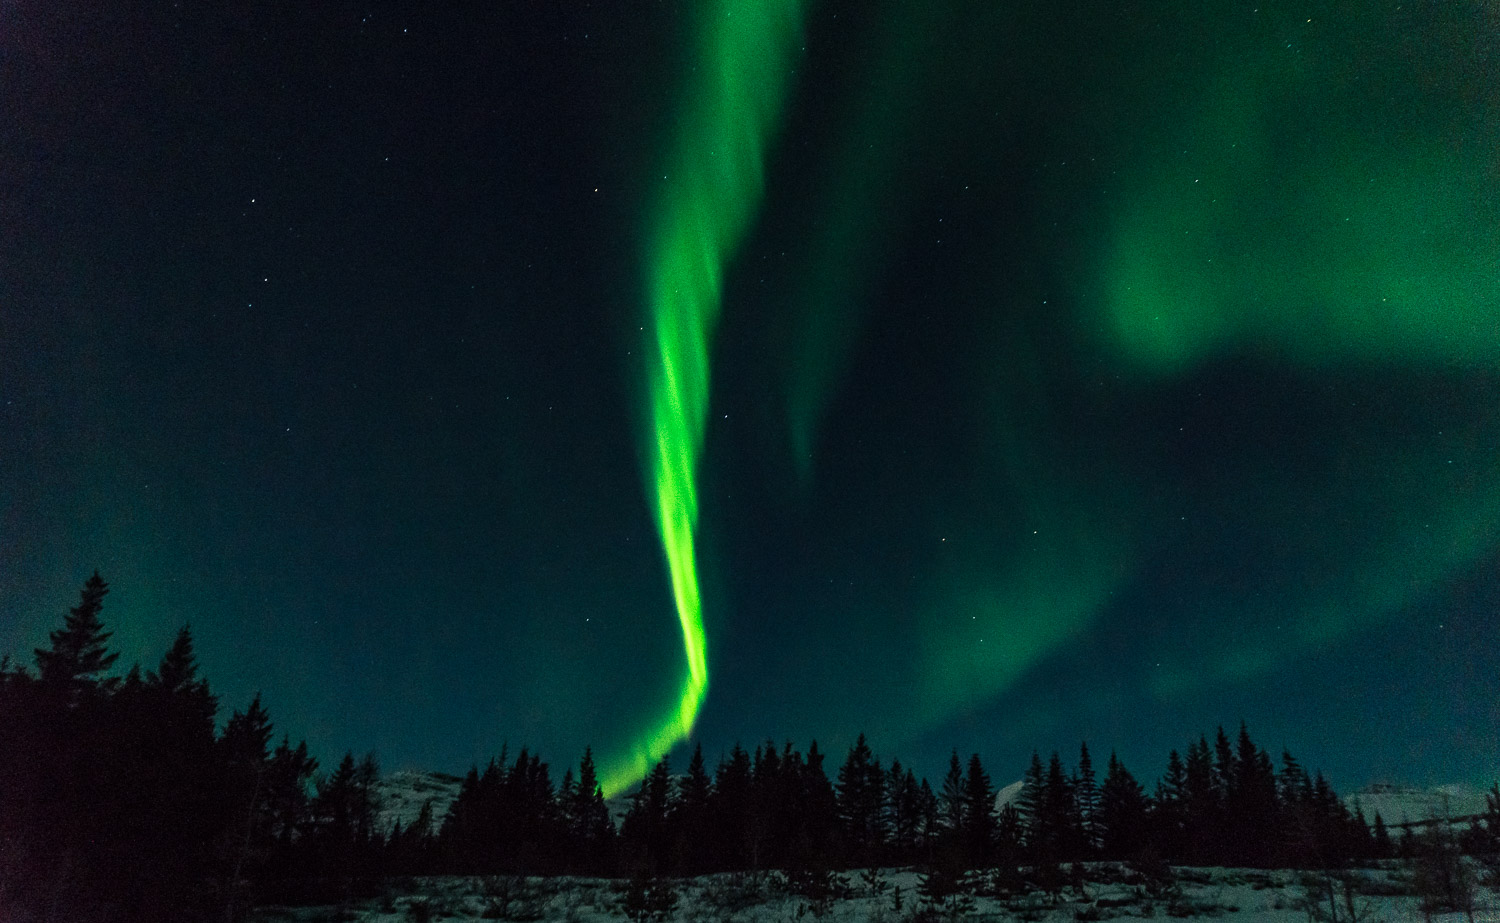 Northern lights tour, Aurora boreal, guided tours, super jeep tours, winter